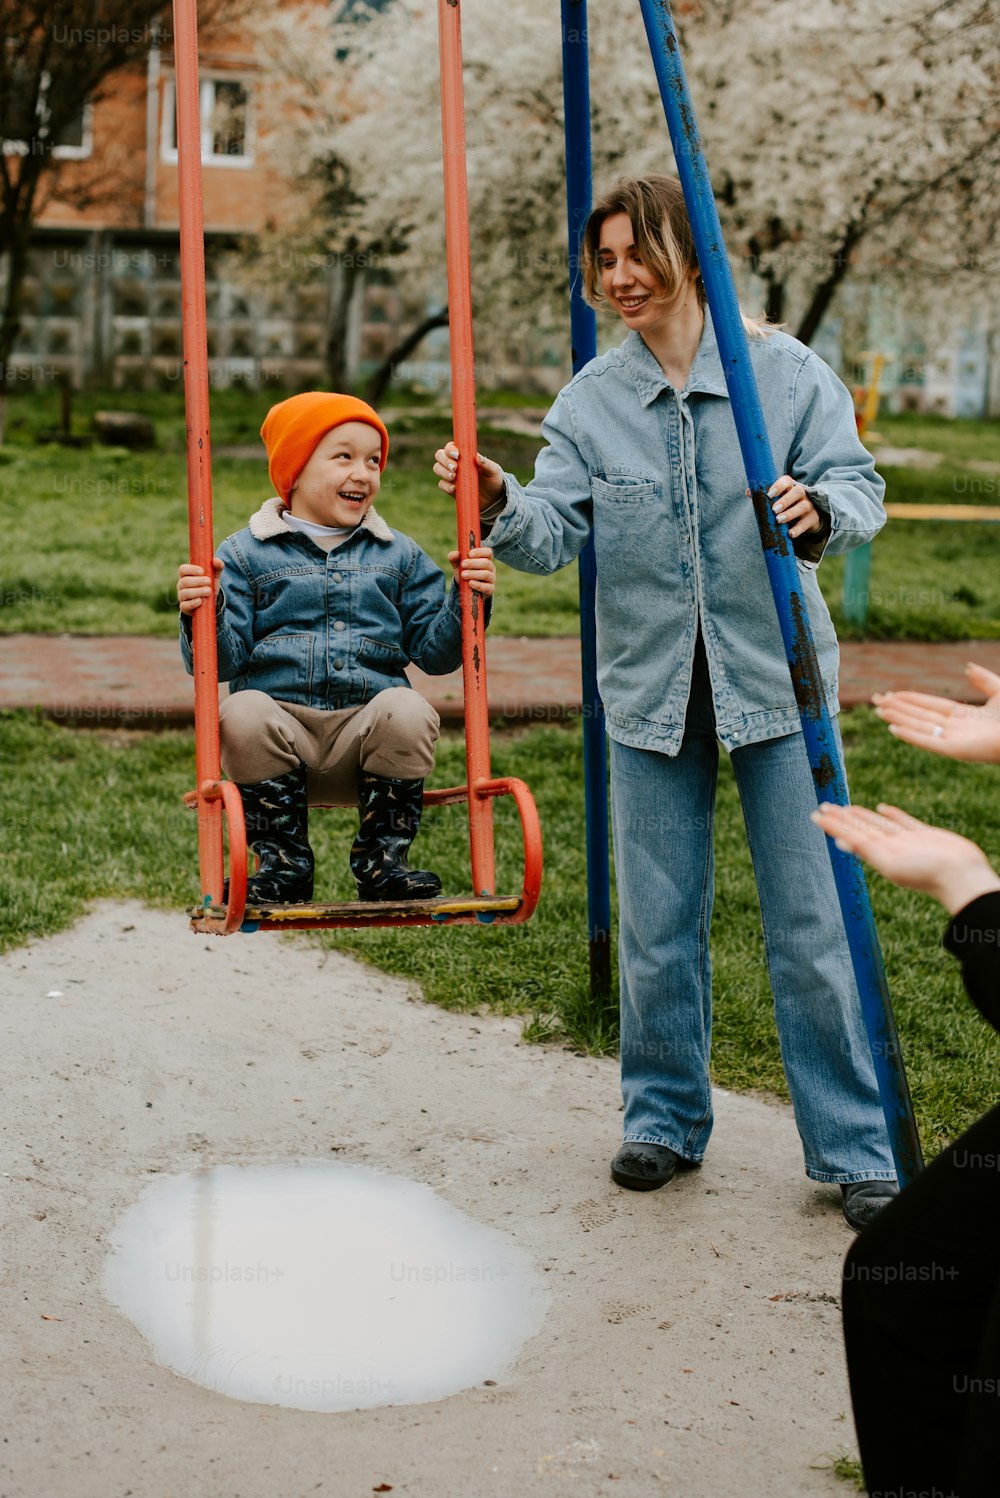 a woman standing next to a child on a swing